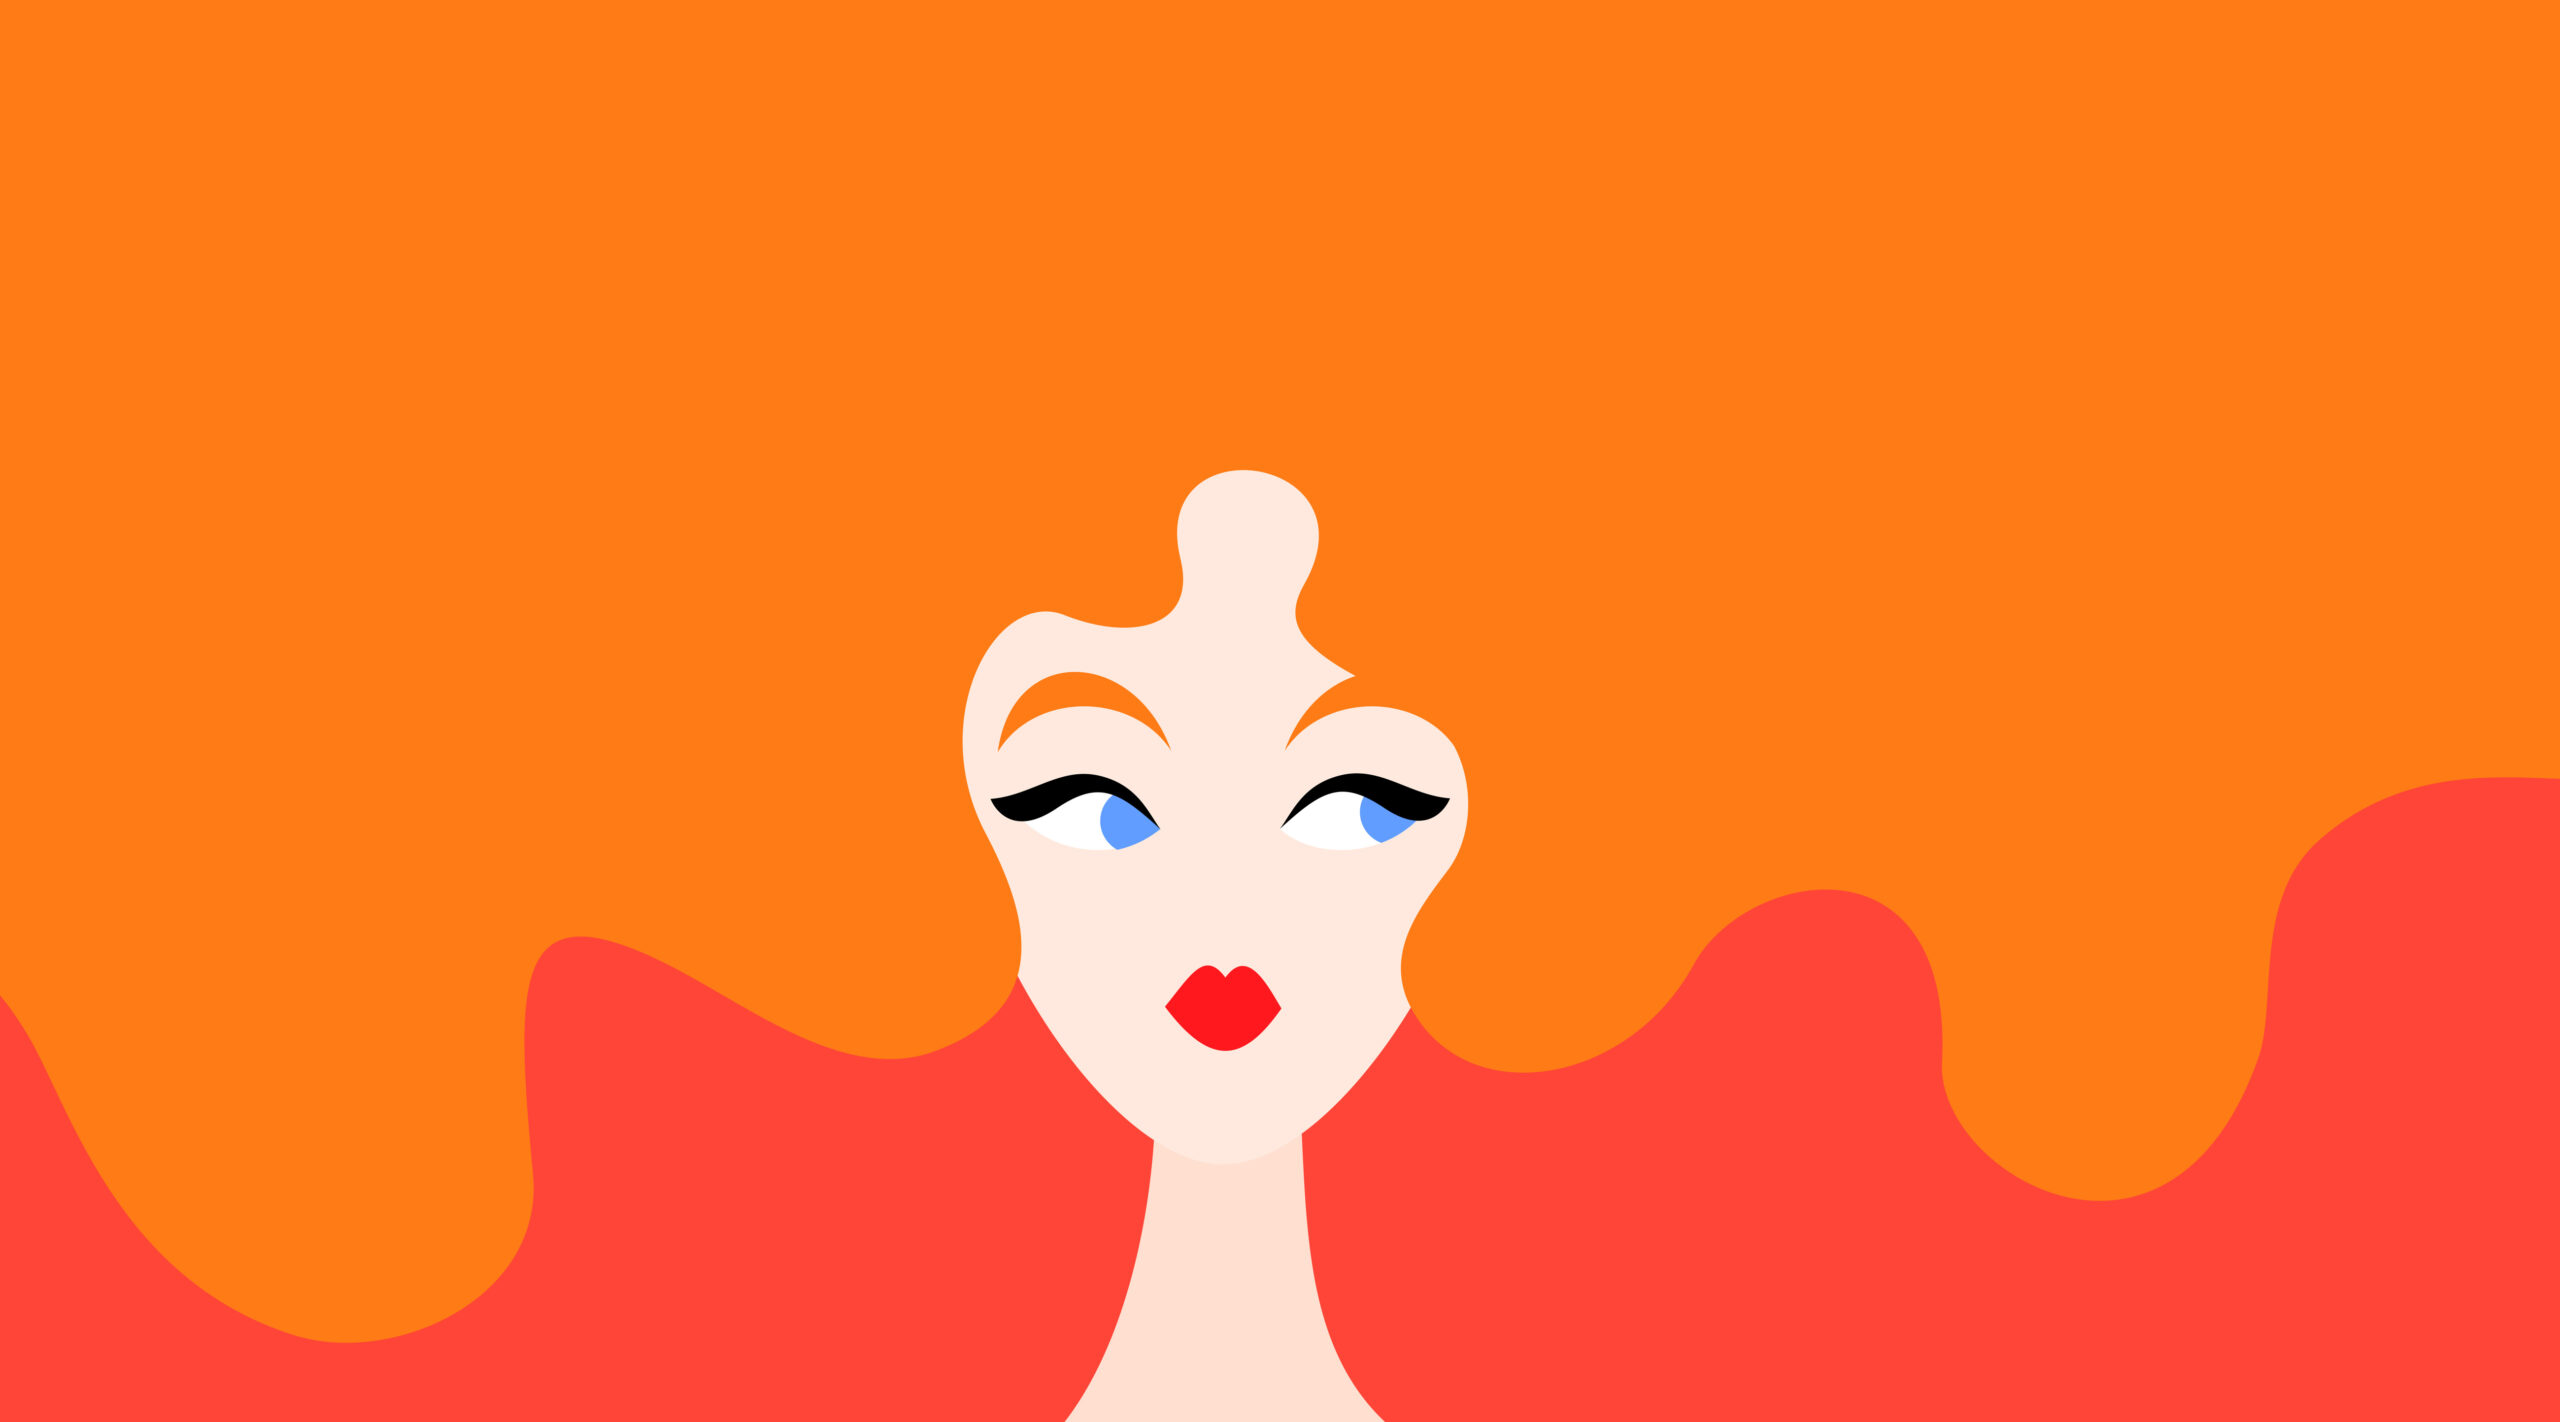 Logo of woman with ginger hair and blue eyes